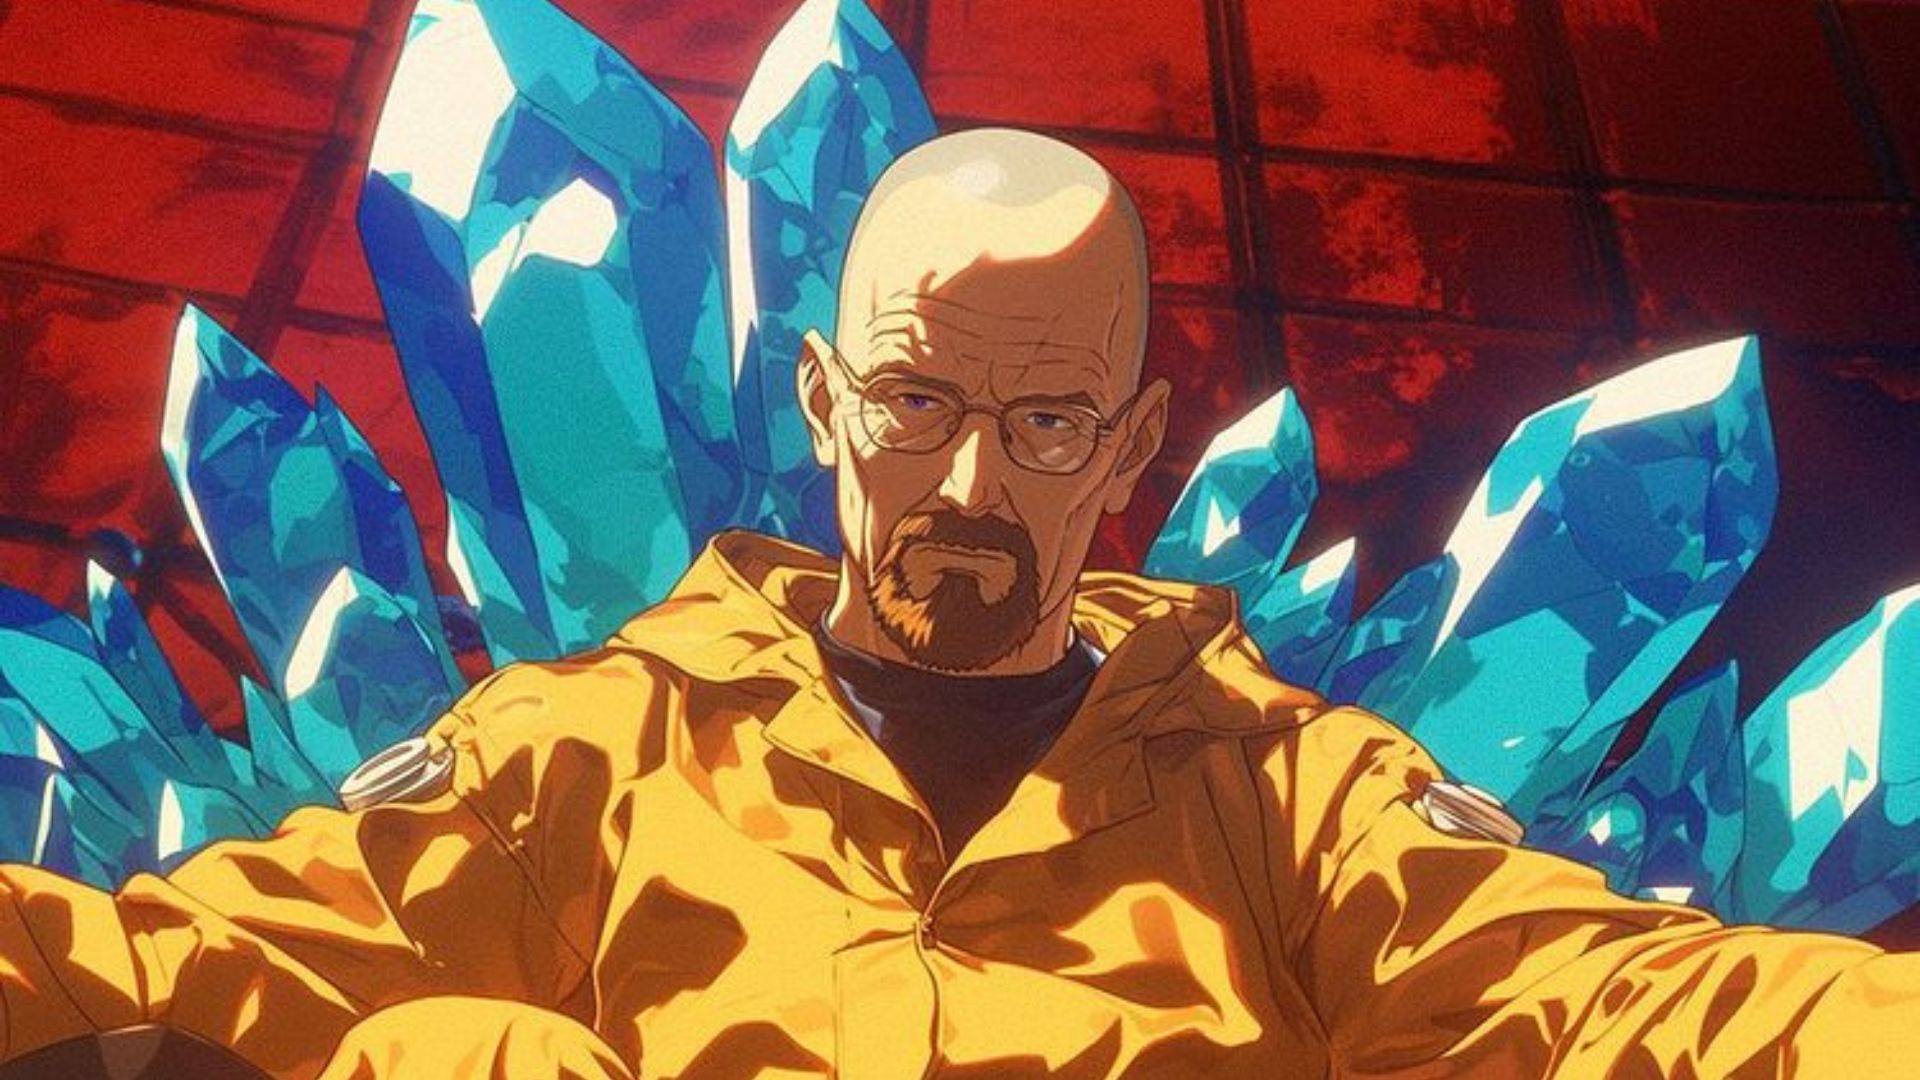 Walter White Gets Transformed into Vibrant Anime-Style Art